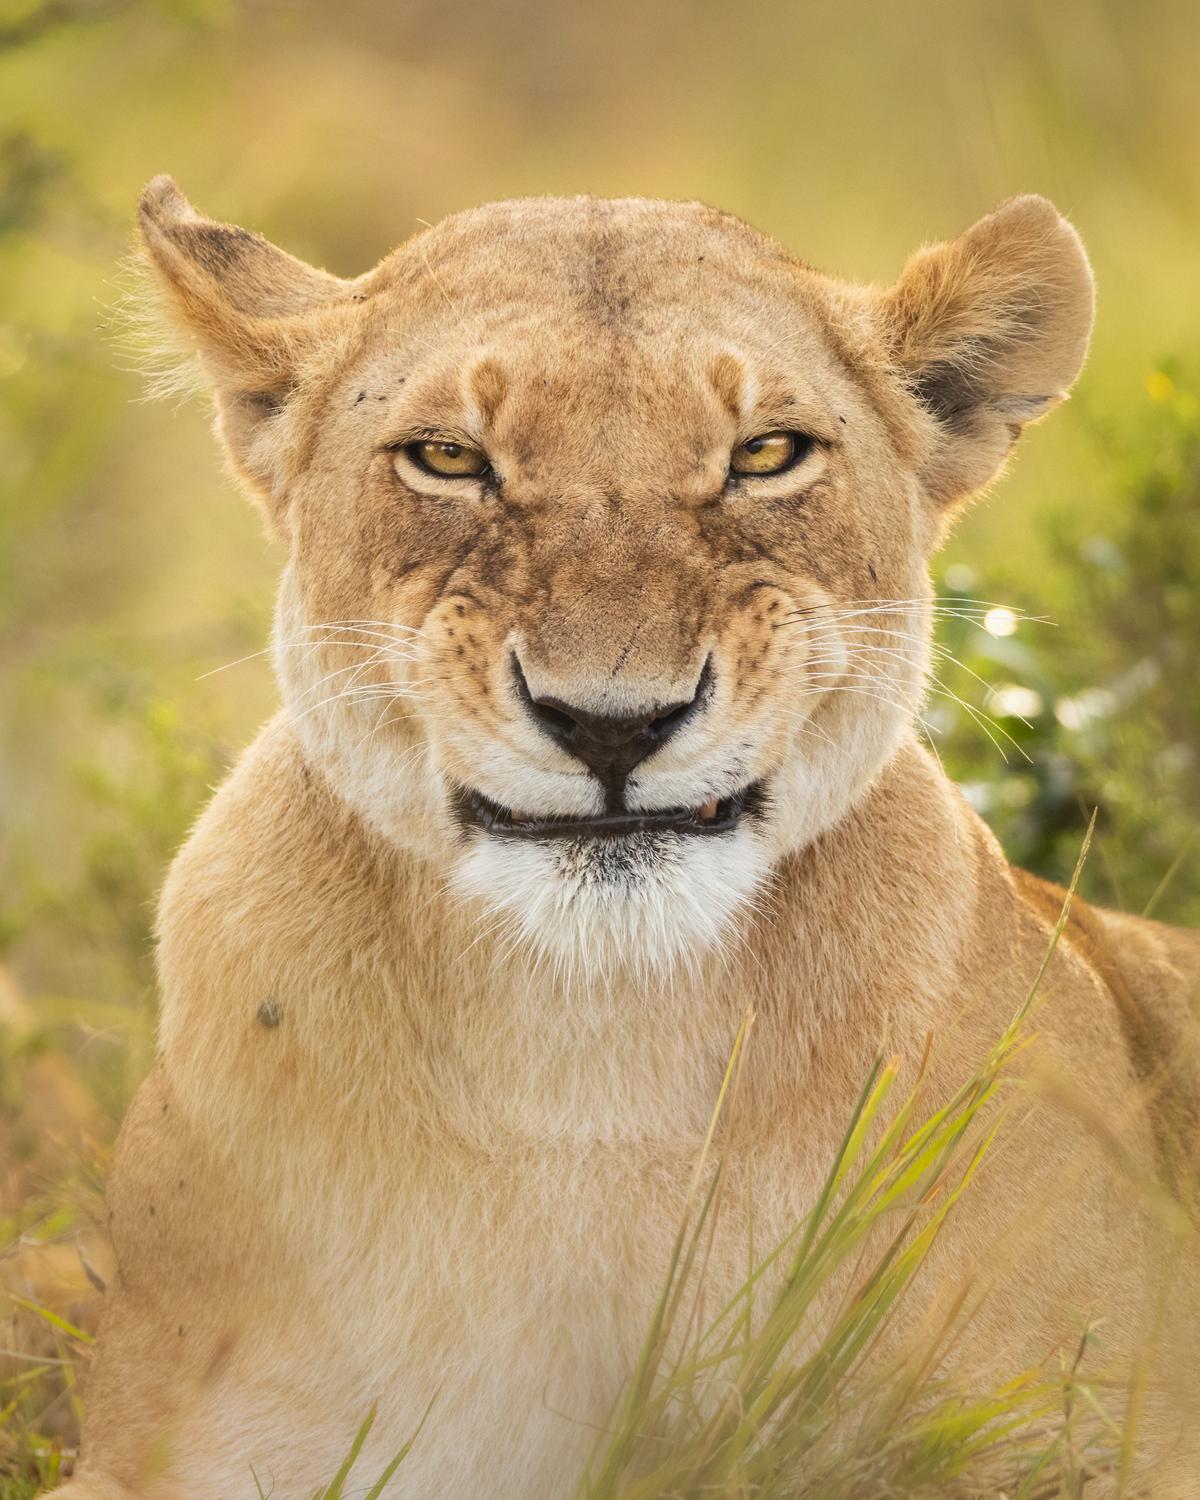 "What Do You Mean Smile?! I Am Smiling!" I spent a whole morning with this lion pride. One of the lionesses made some funny facial expressions after yawning, luckily for me she looked straight into the camera for a moment and I caught this fake smile. (Courtesy of Alison Buttigieg)